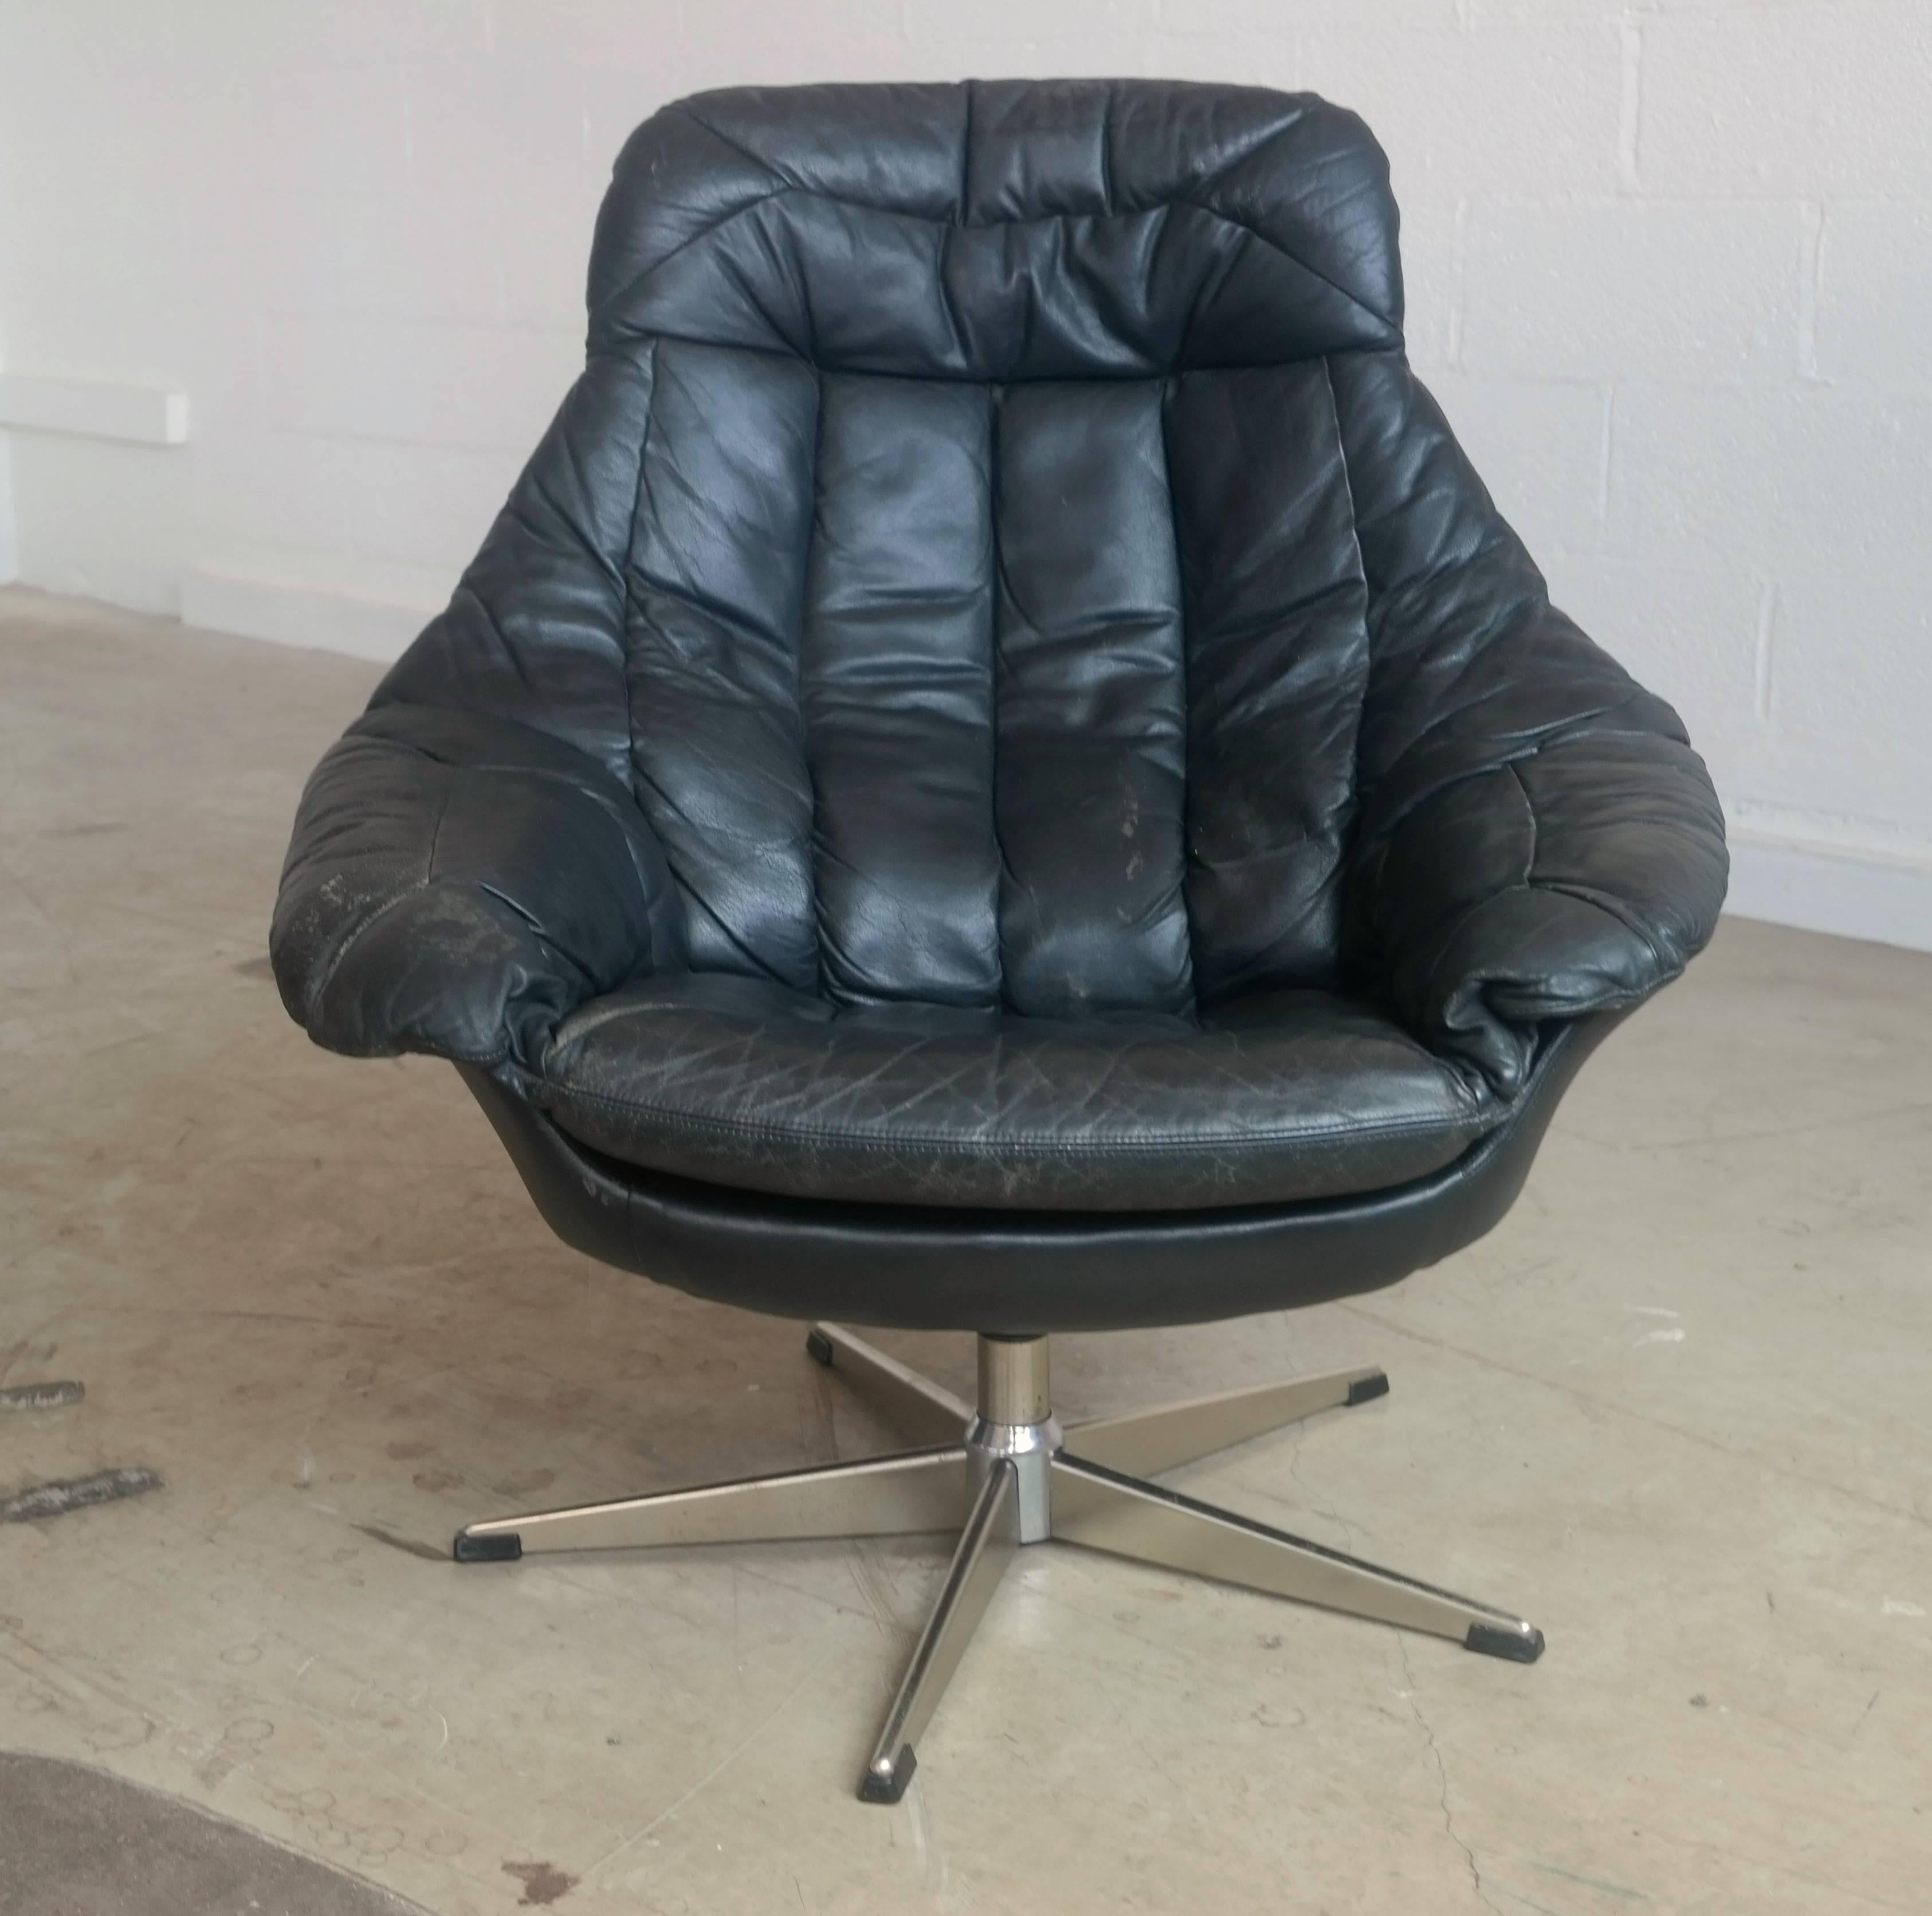 Fantastic pair of highback swivel lounge chairs with one ottoman designed by H.W. Klein for Bramin, Denmark, circa 1970. Upholstered in original rich black tufted leather and mounted on five-star metal swivel base, these chairs are magnificently